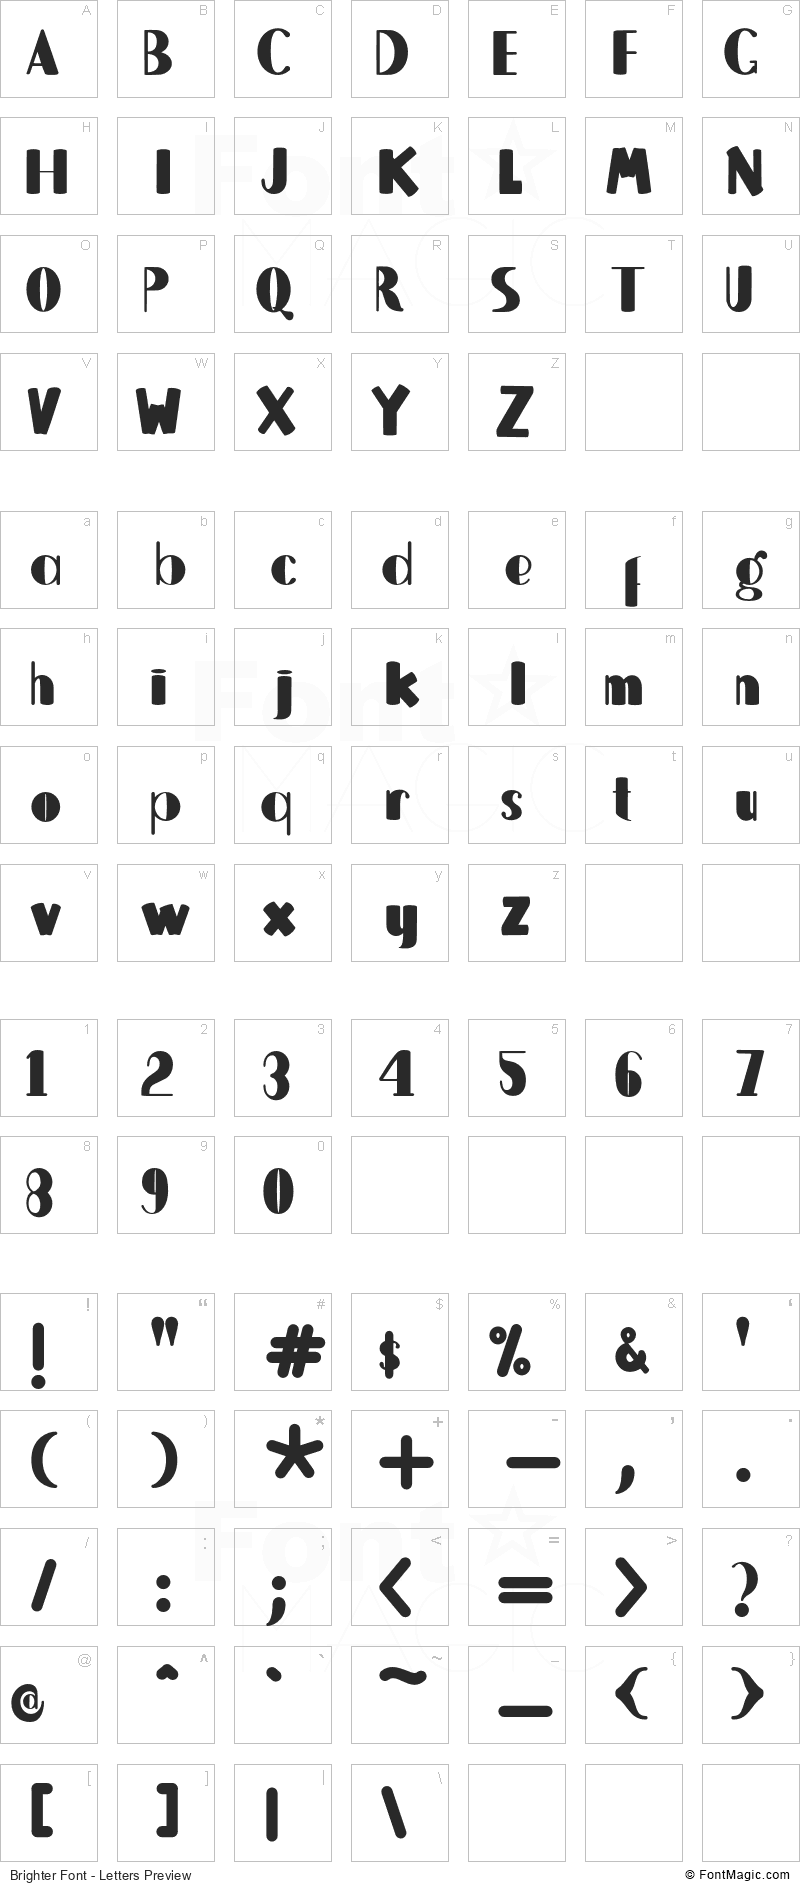 Brighter Font - All Latters Preview Chart